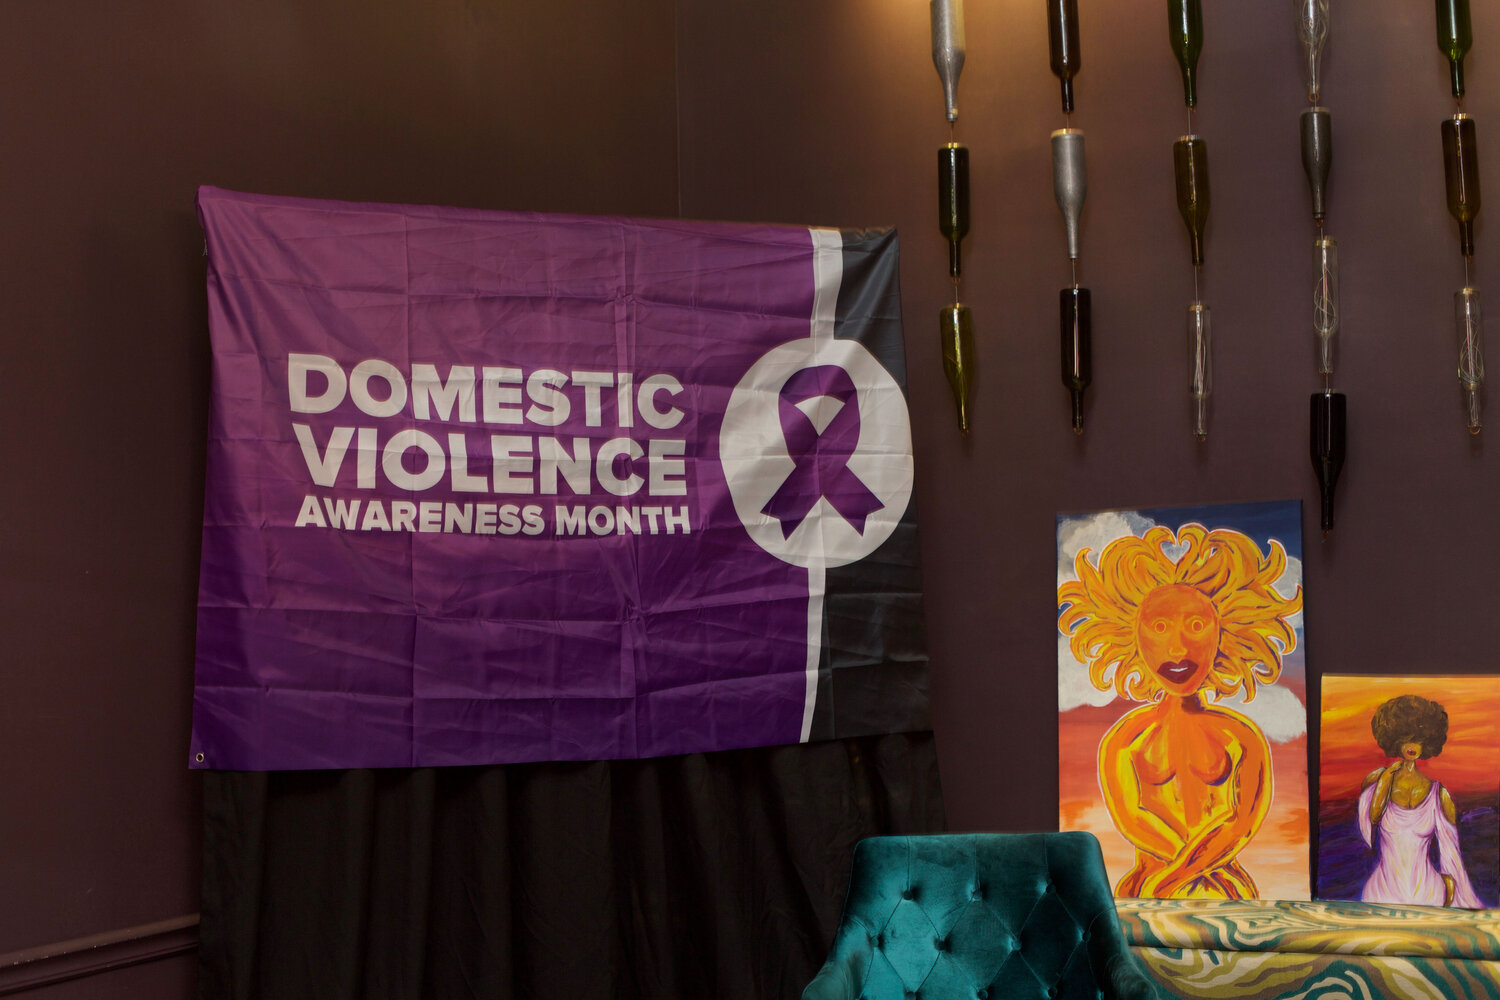 More from the Domestic Abuse Awareness event.